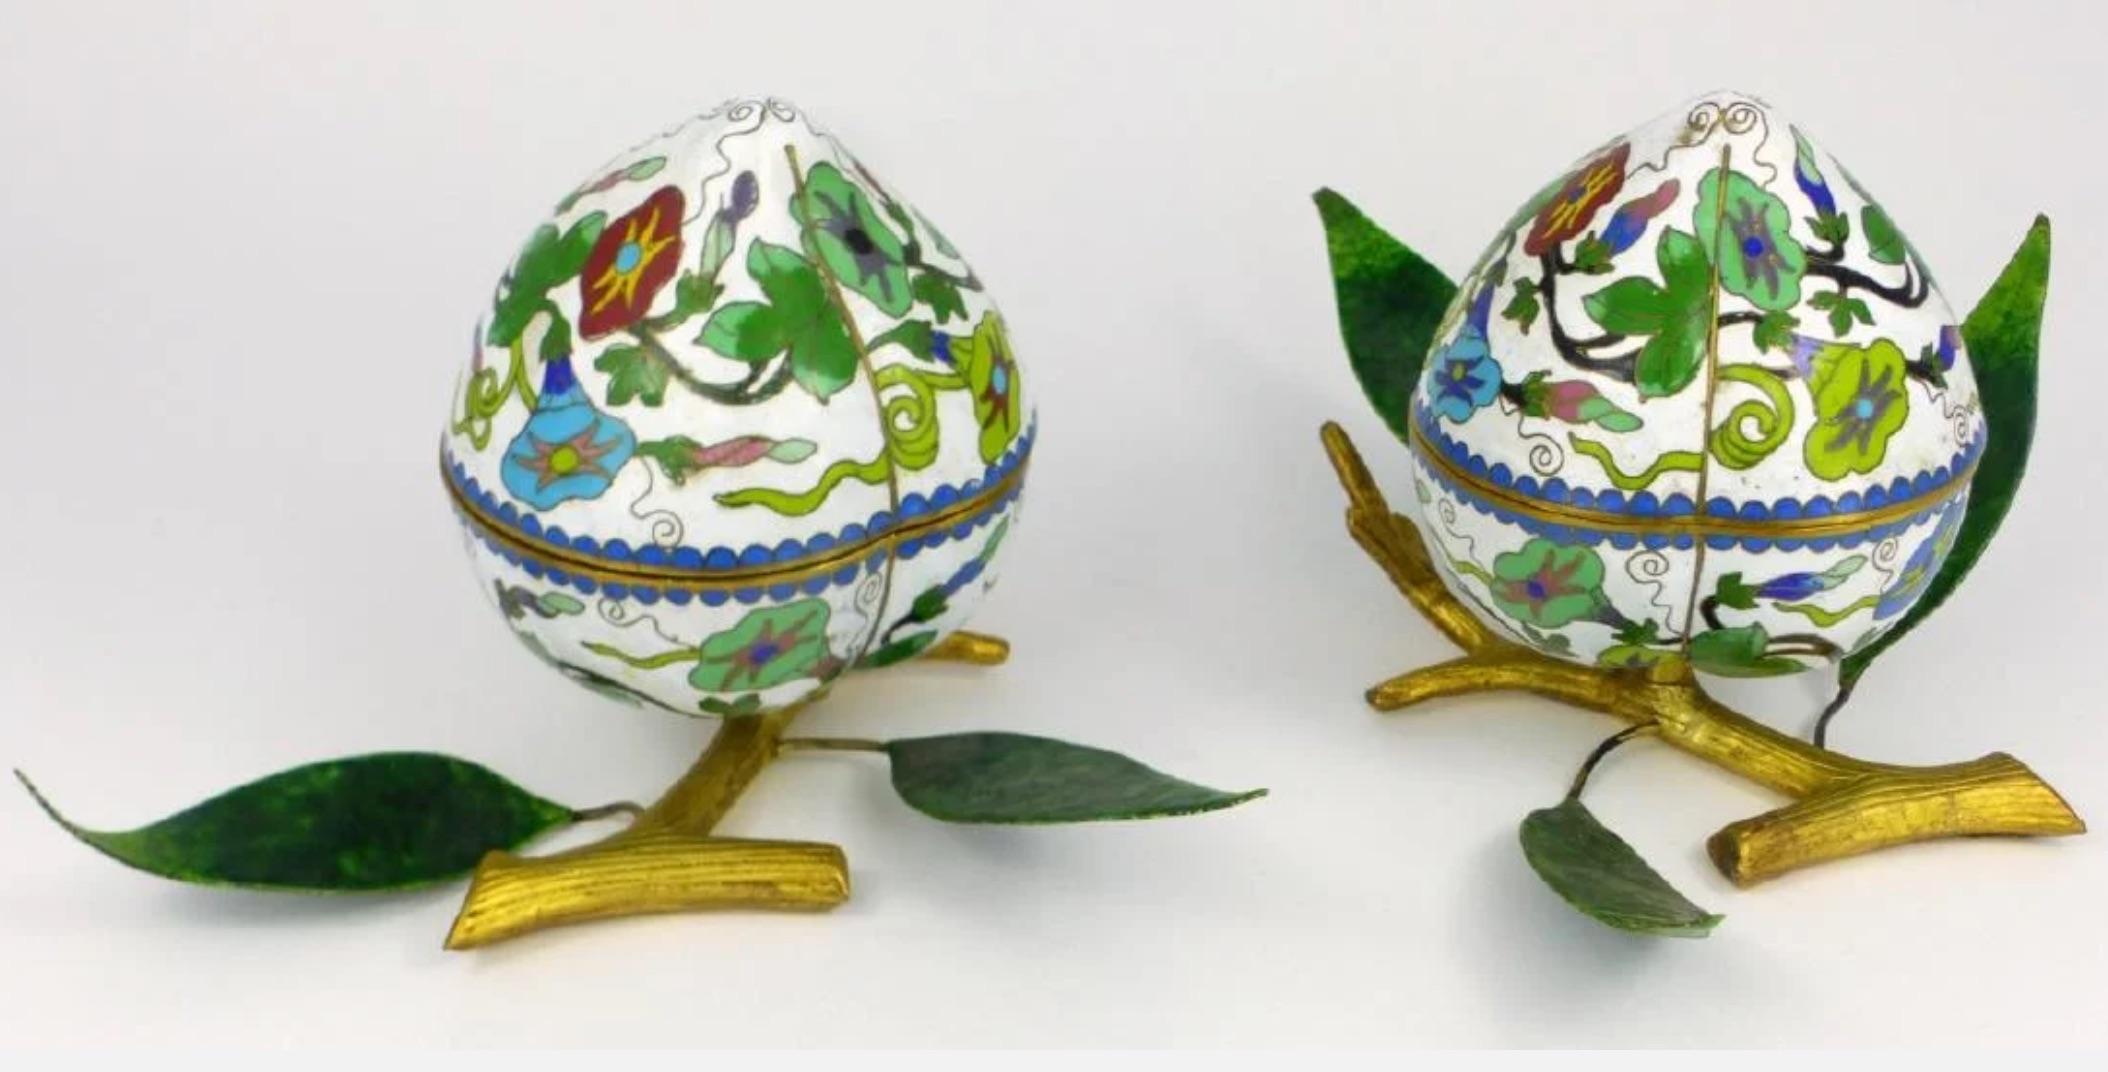 Enameled Pair of Chinese Cloisonné Enamel Peach-Form Box and Cover, circa 1910-1940 For Sale